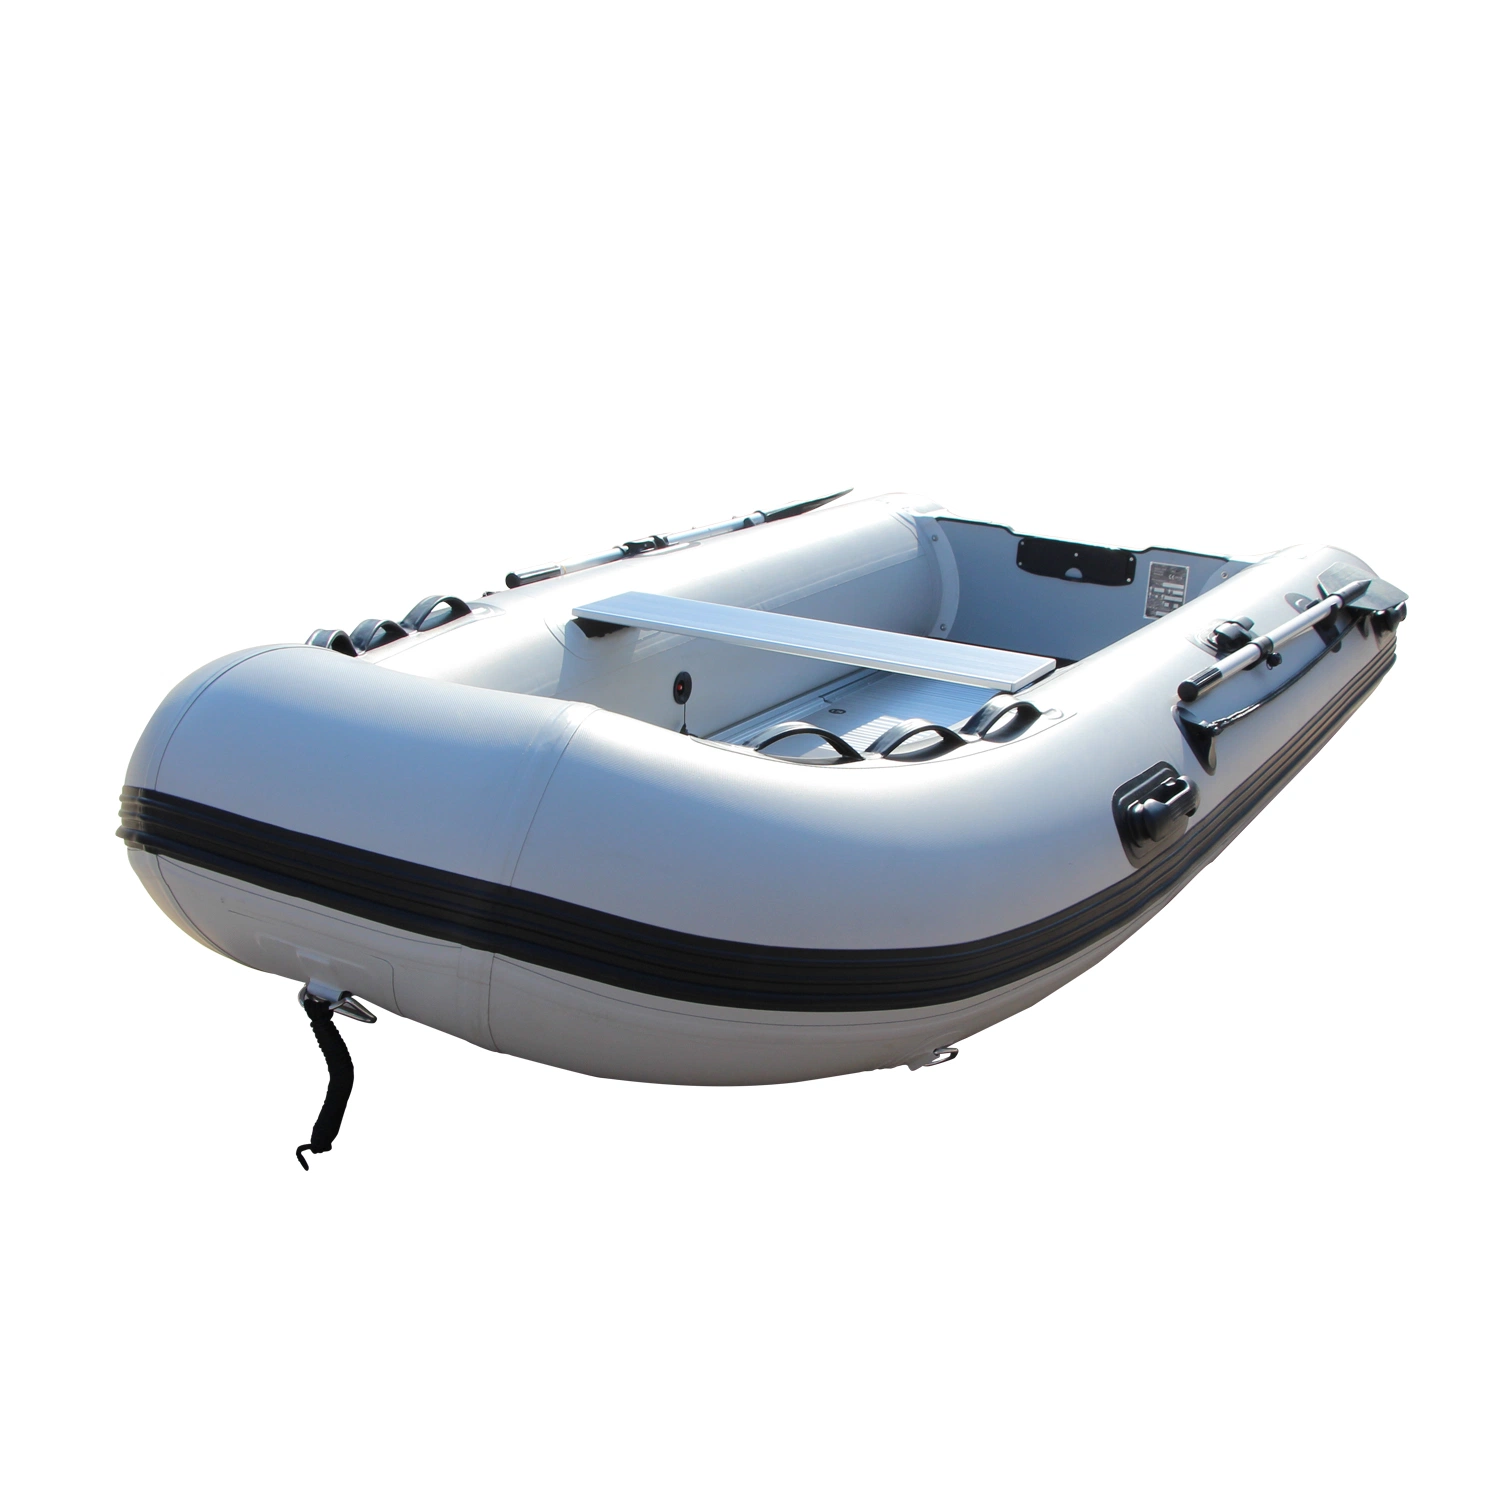 3.3m High quality/High cost performance River Rafting/Aluminum/Inflatable Sport Boat